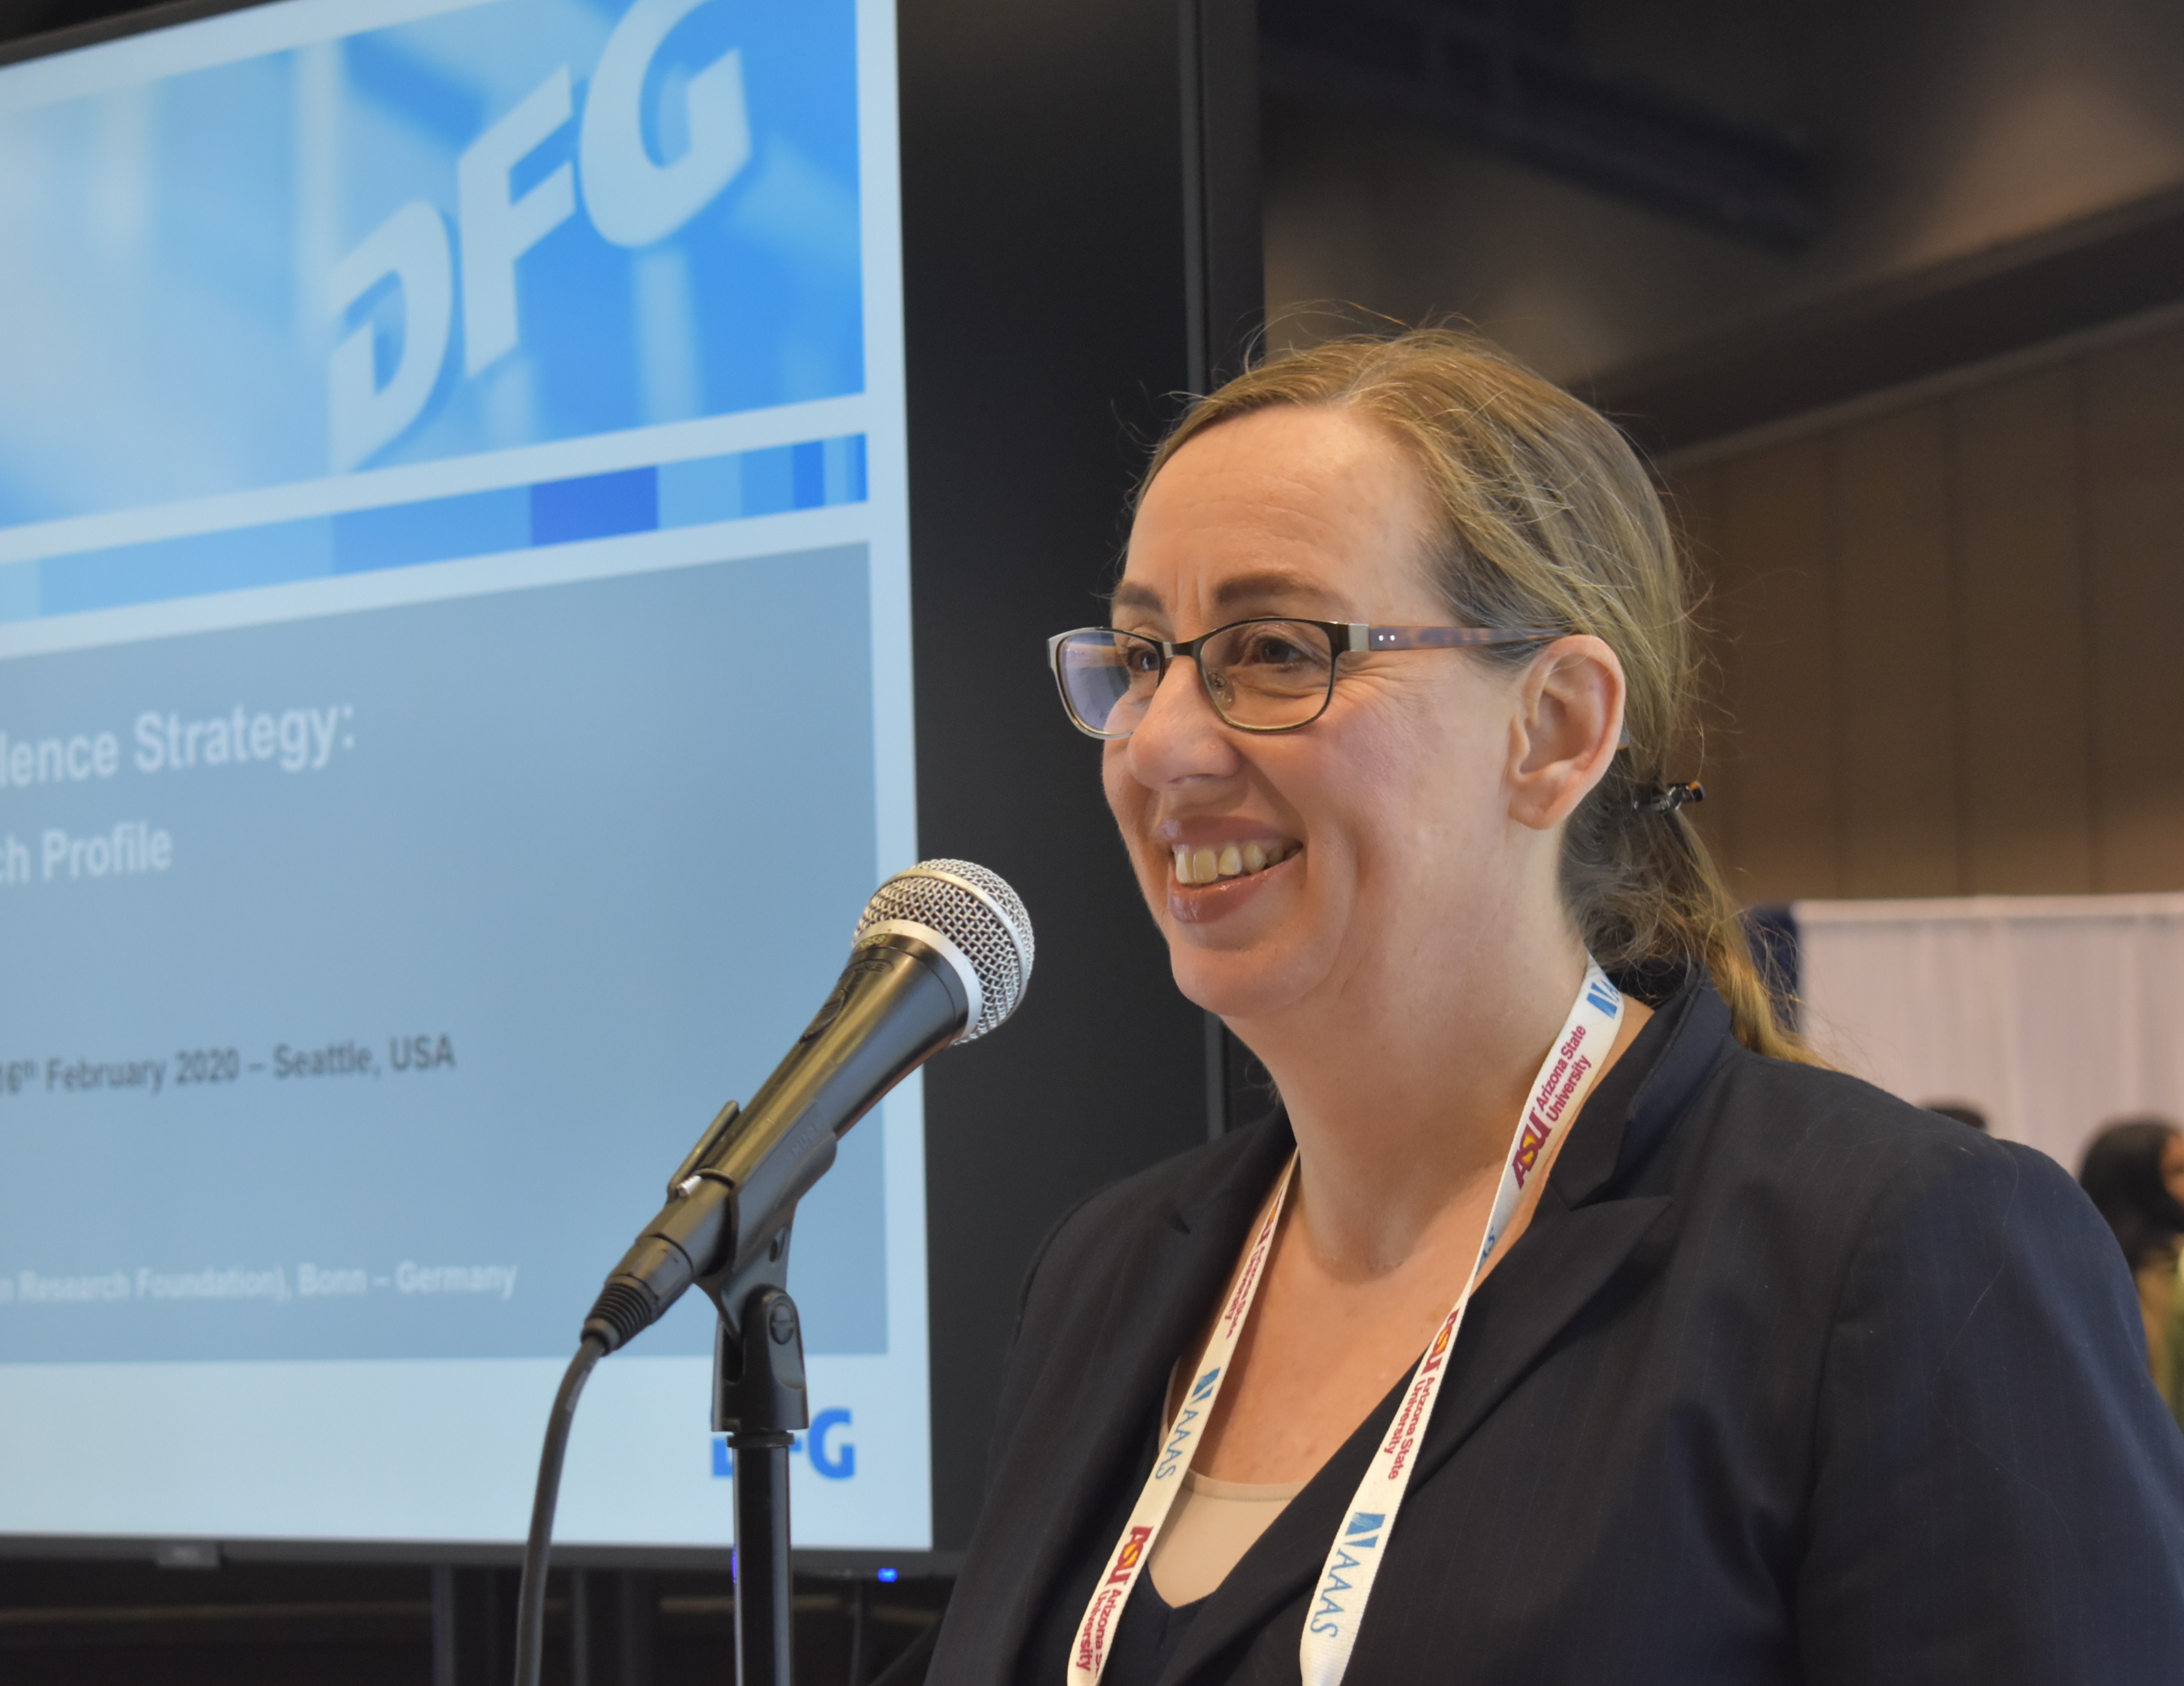 Dr. Ulrike Eickhoff, Head of the Department of Coordinated Programmes and Infrastructure at the DFG